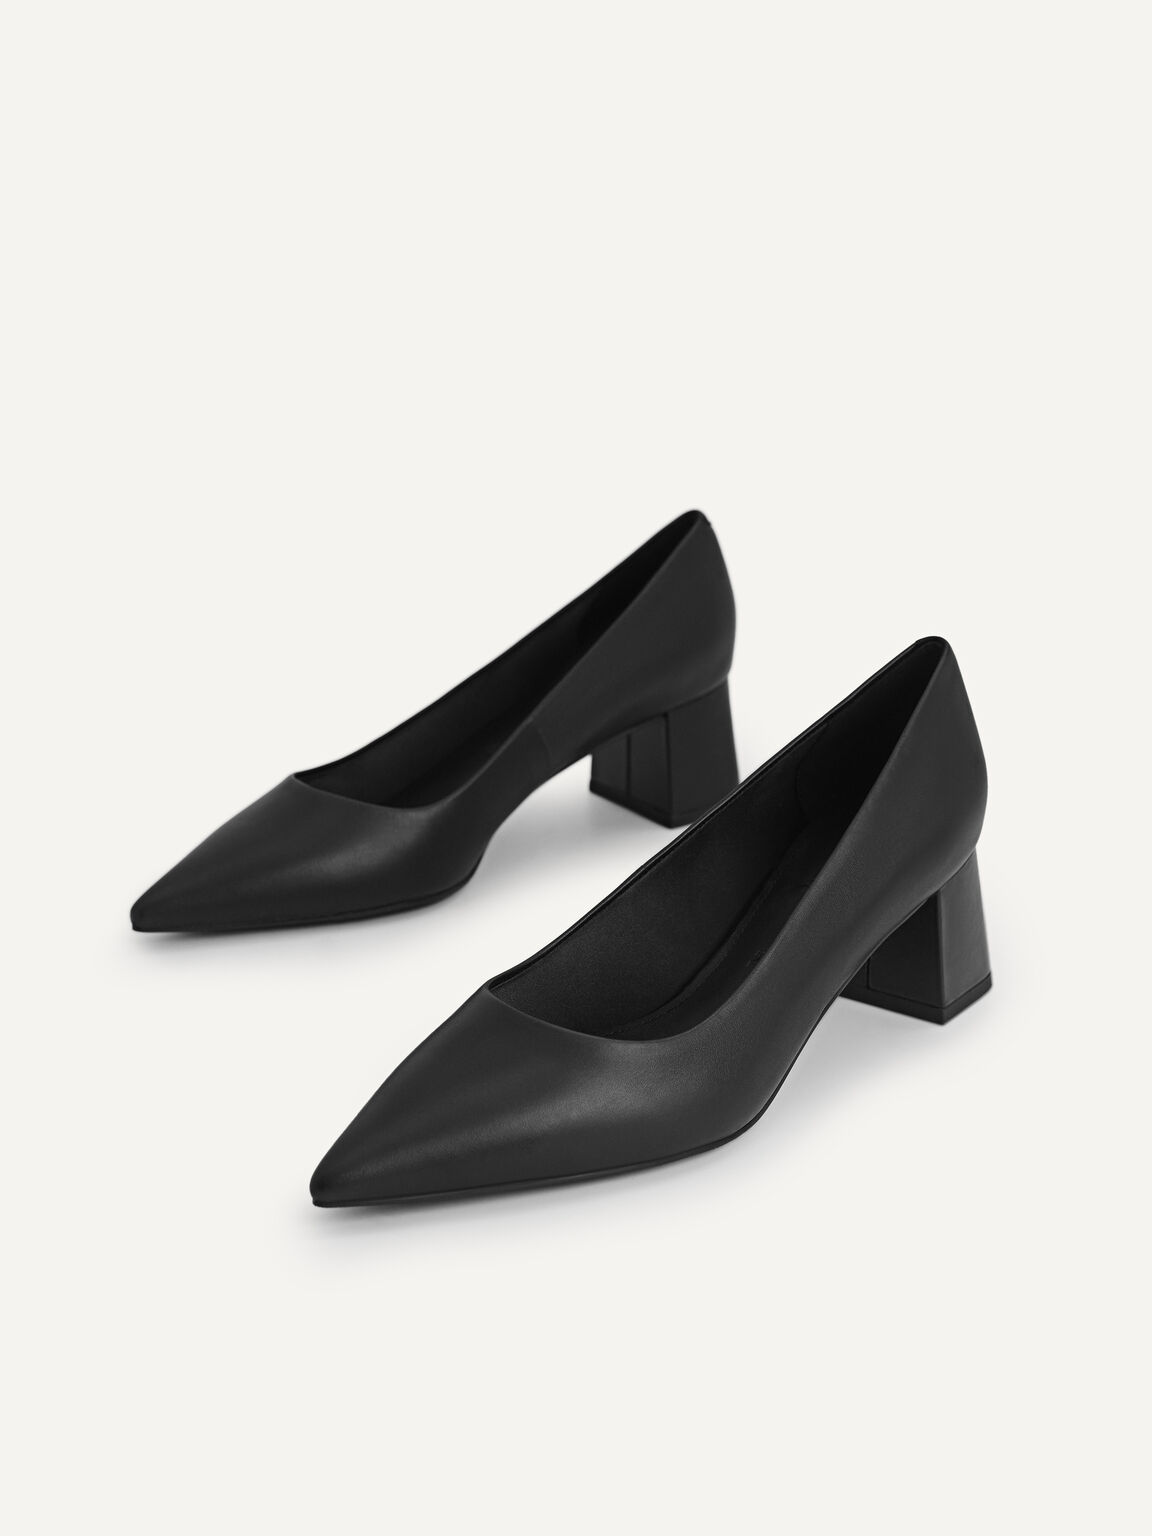 Leather Pointed Toe Pumps, Black